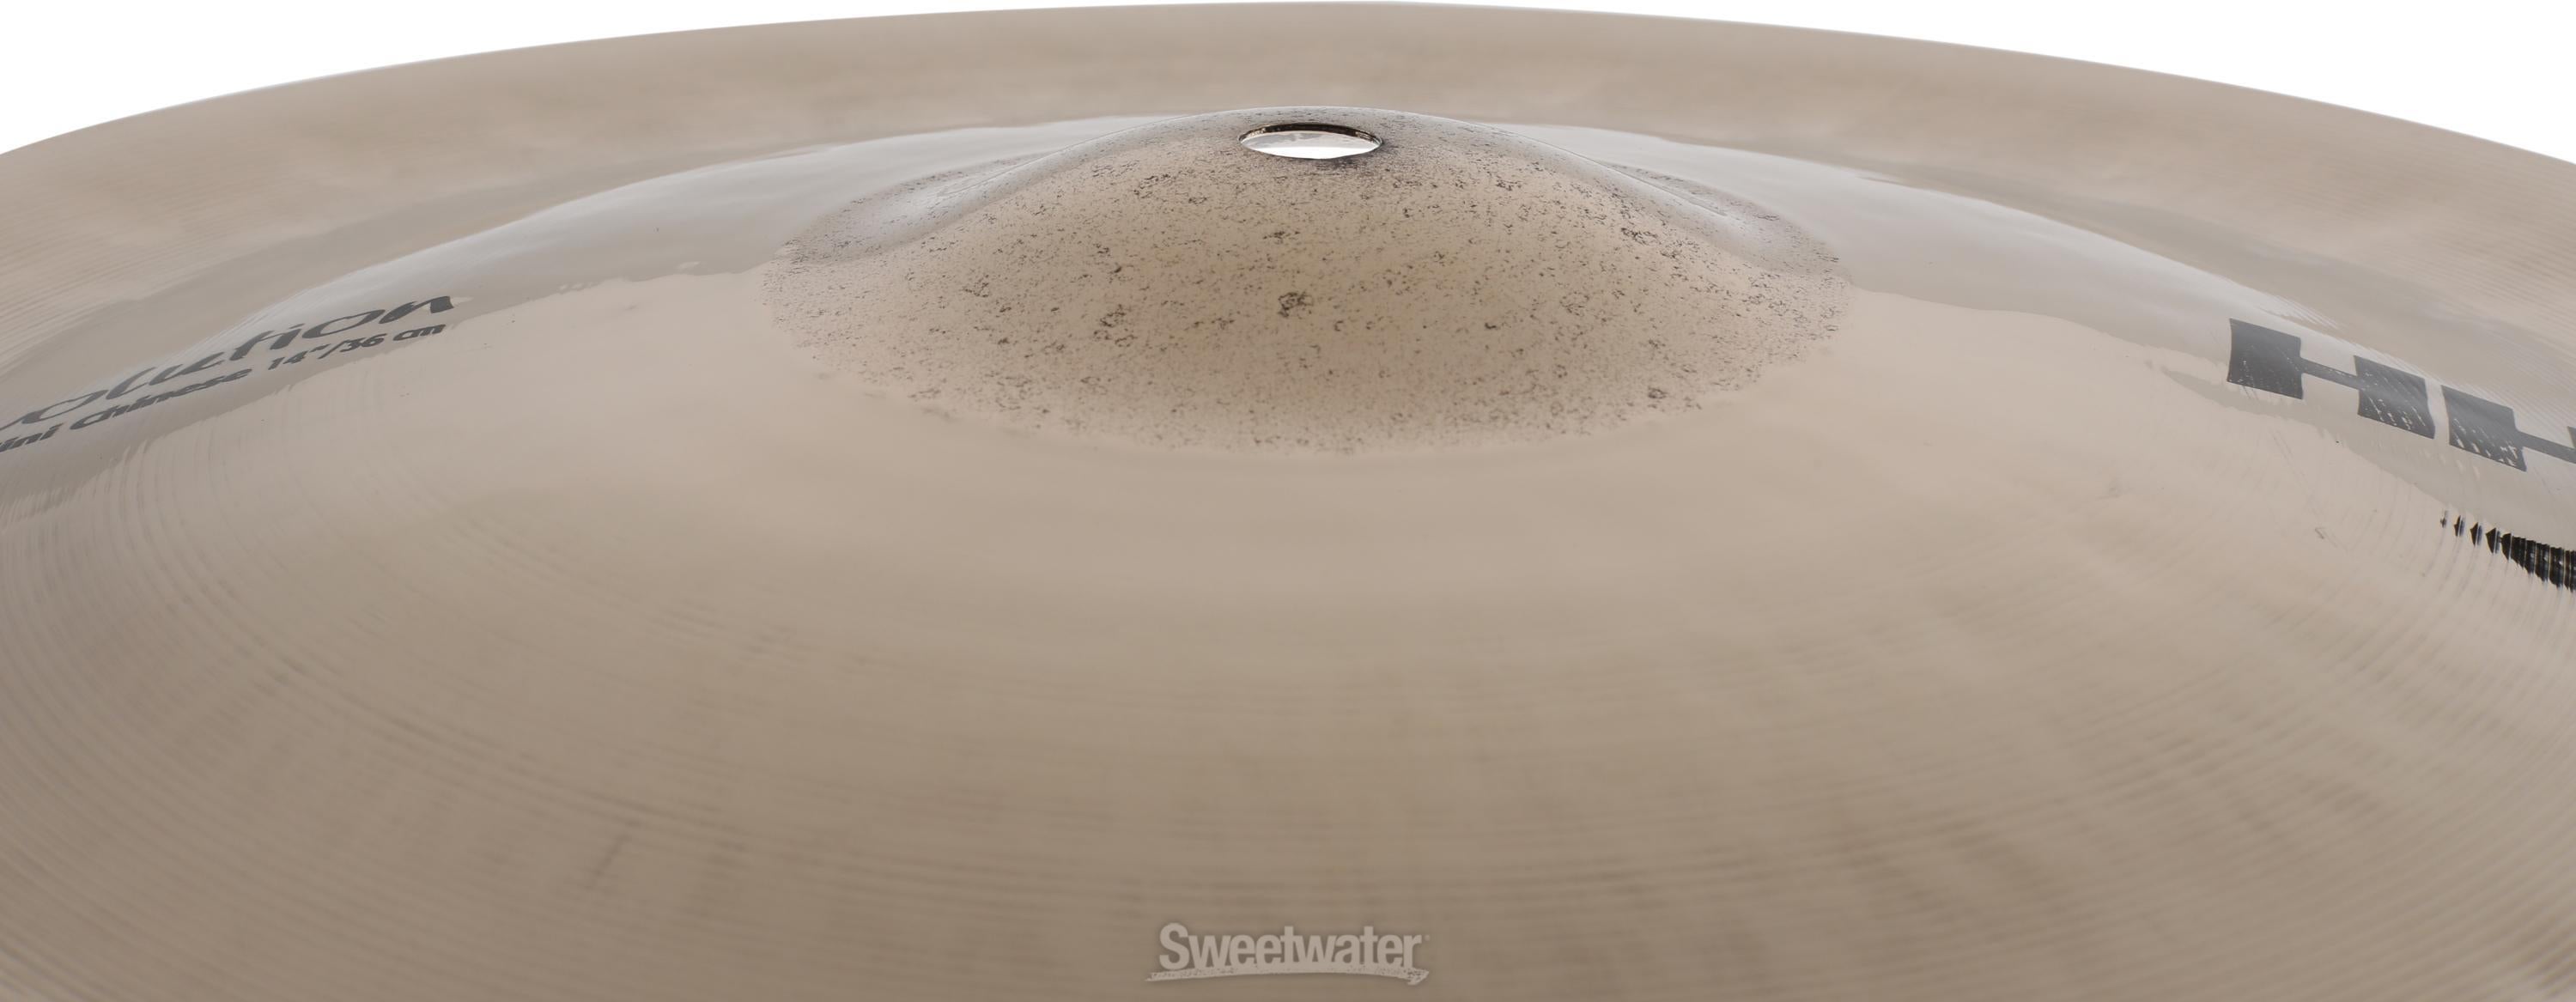 Sabian 14 inch HHX Evolution Mini Chinese Cymbal | Sweetwater